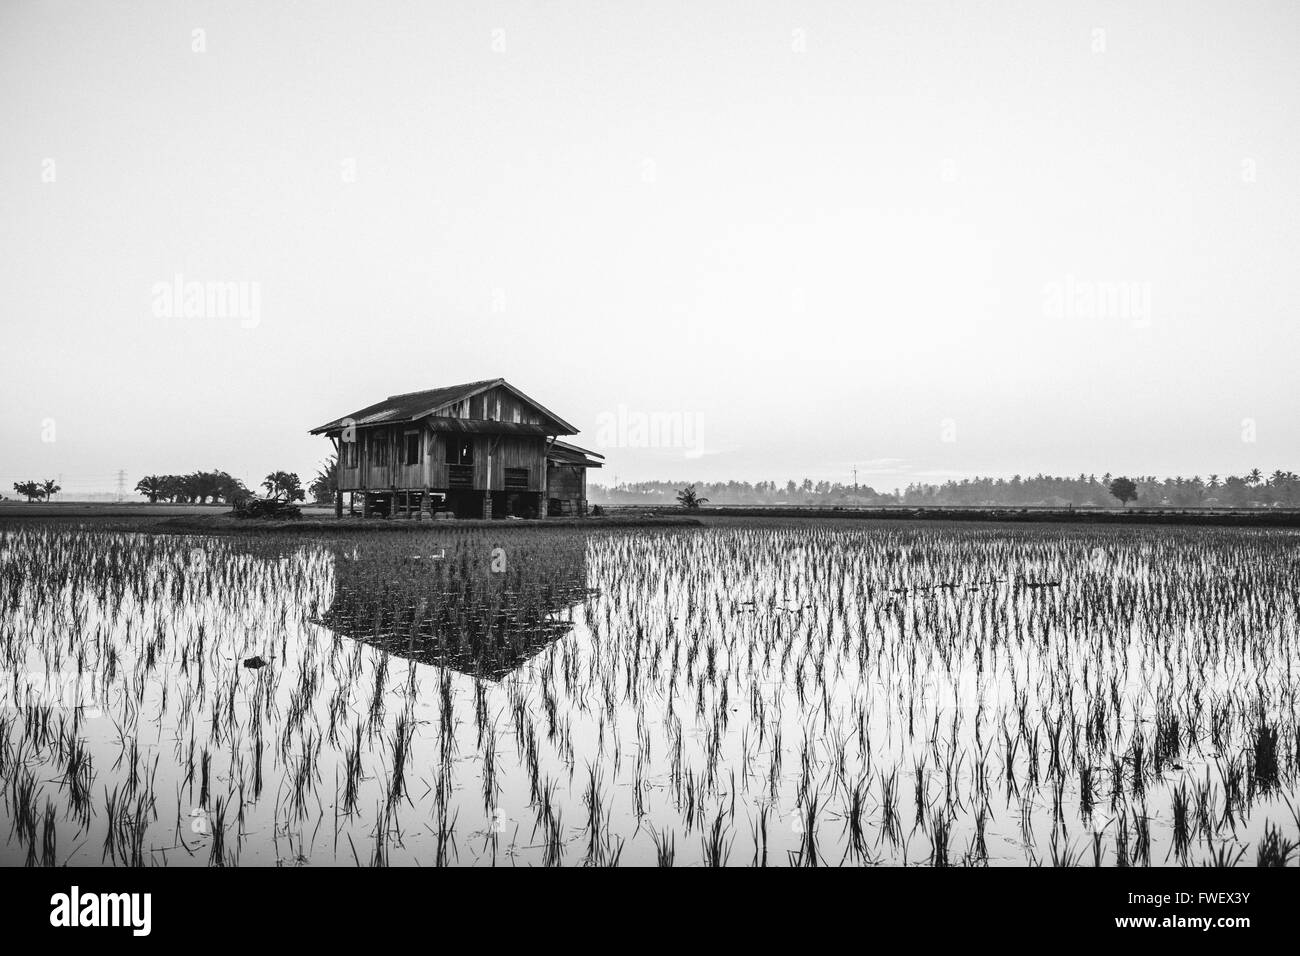 Abandoned wooden house in middle of paddy field with a sunrise sky in the background. Stock Photo